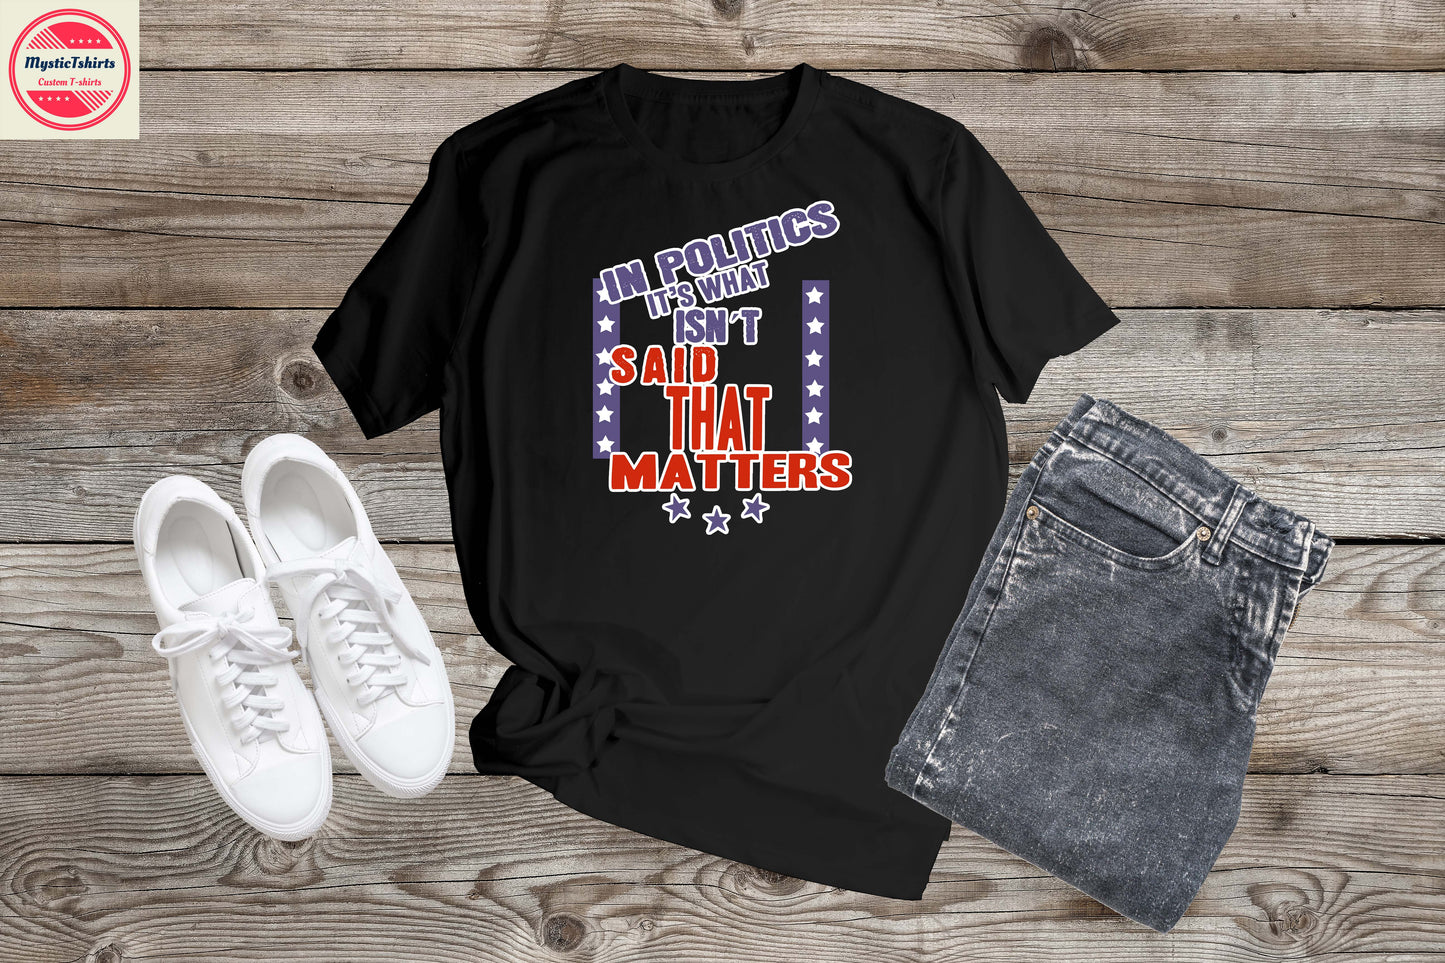 241. IN POLITICS IT'S WHAT ISN'T SAID THAT MATTERS, Custom Made Shirt, Personalized T-Shirt, Custom Text, Make Your Own Shirt, Custom Tee